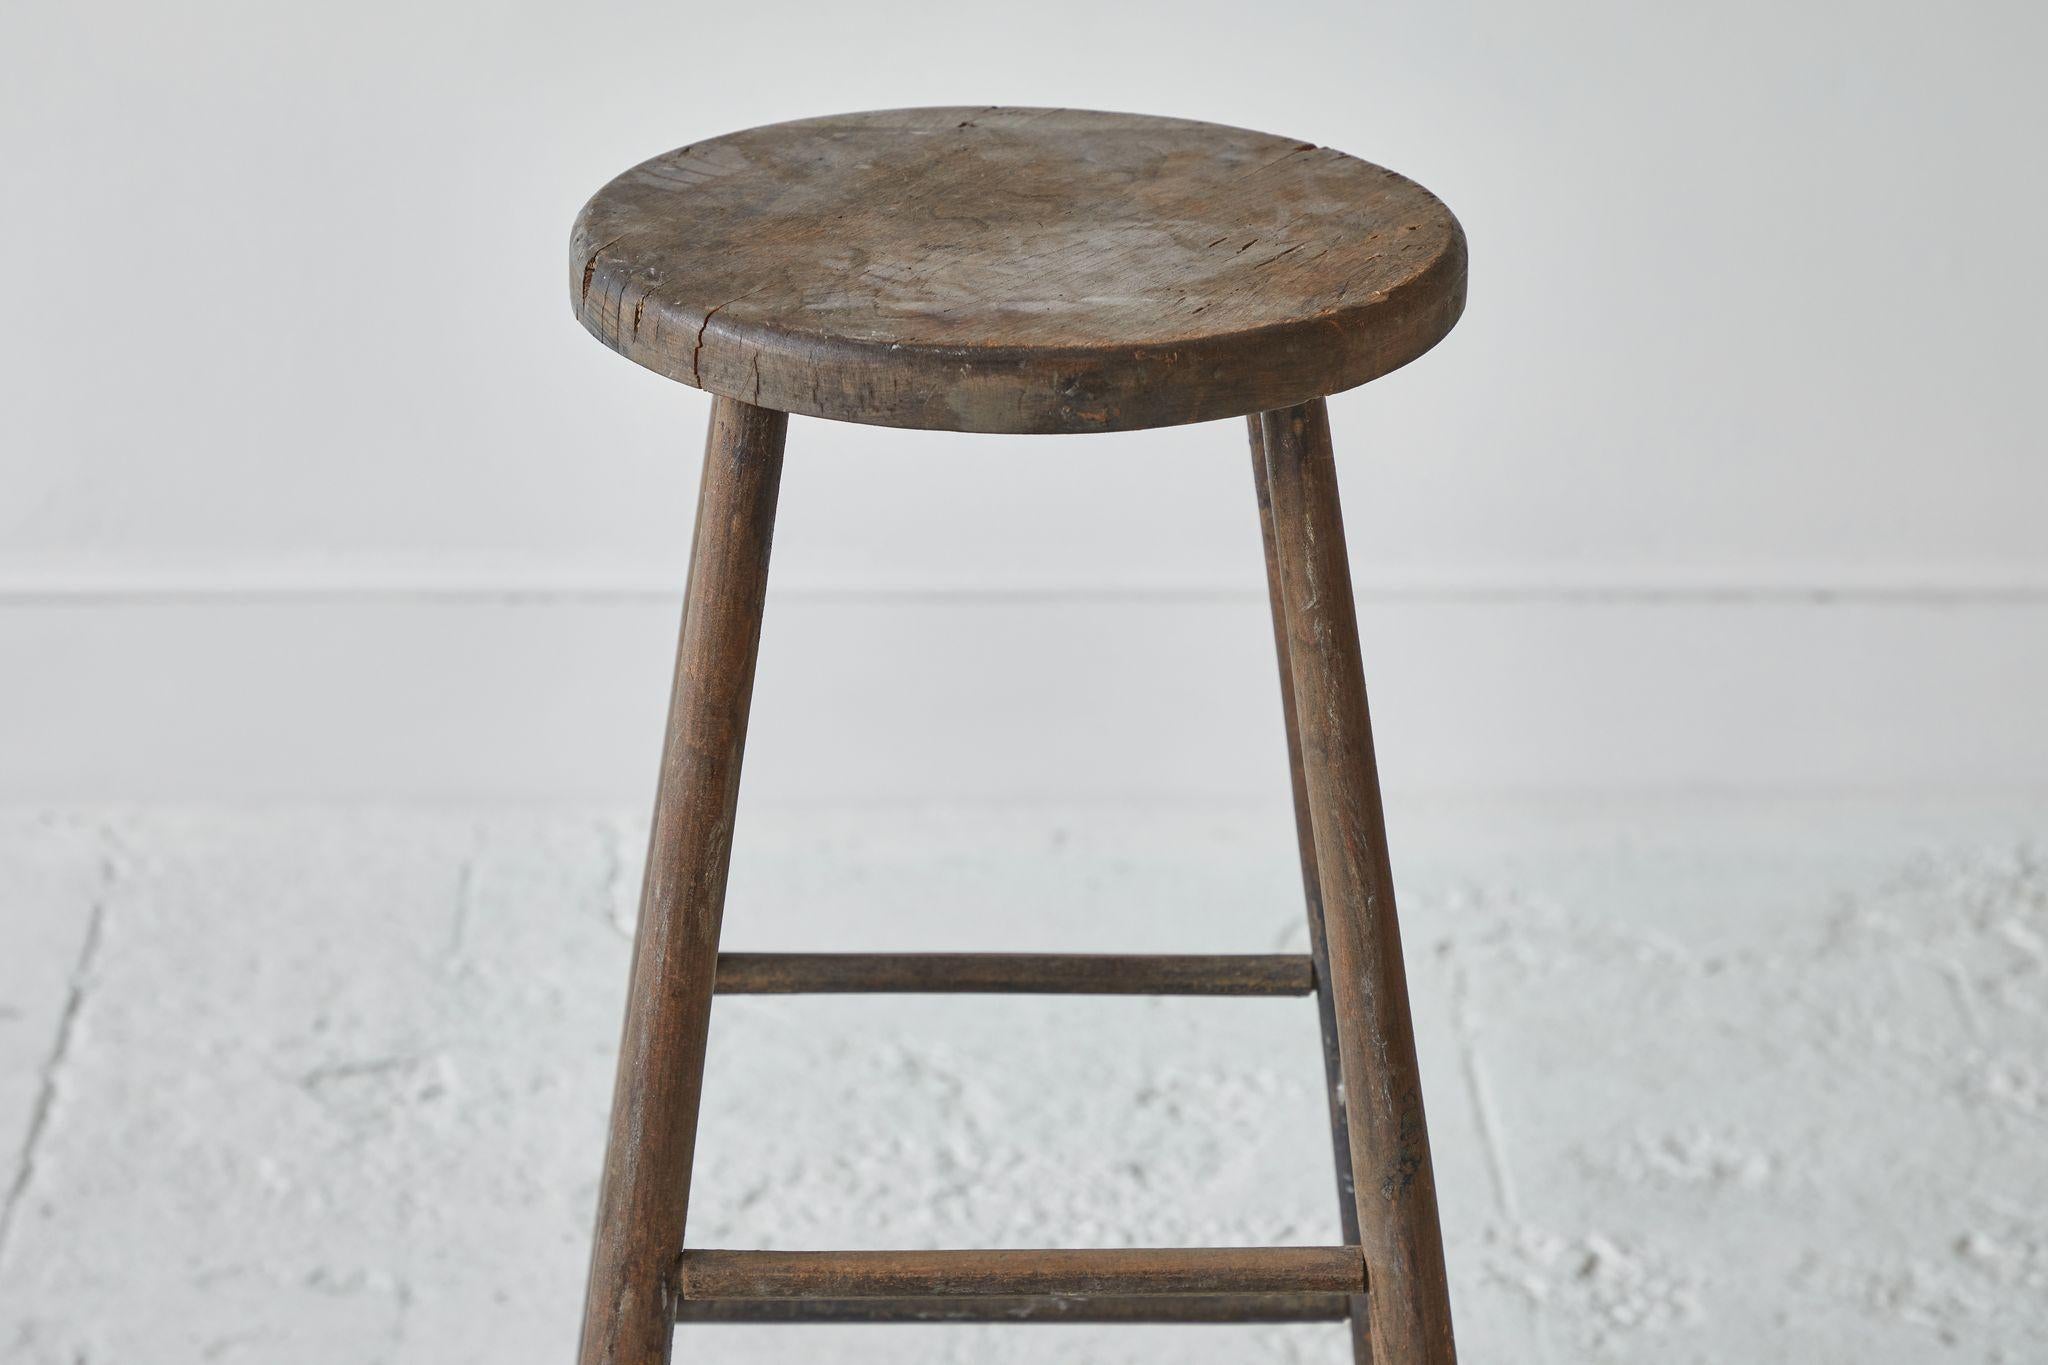 20th Century Early American Rustic Tall Stool